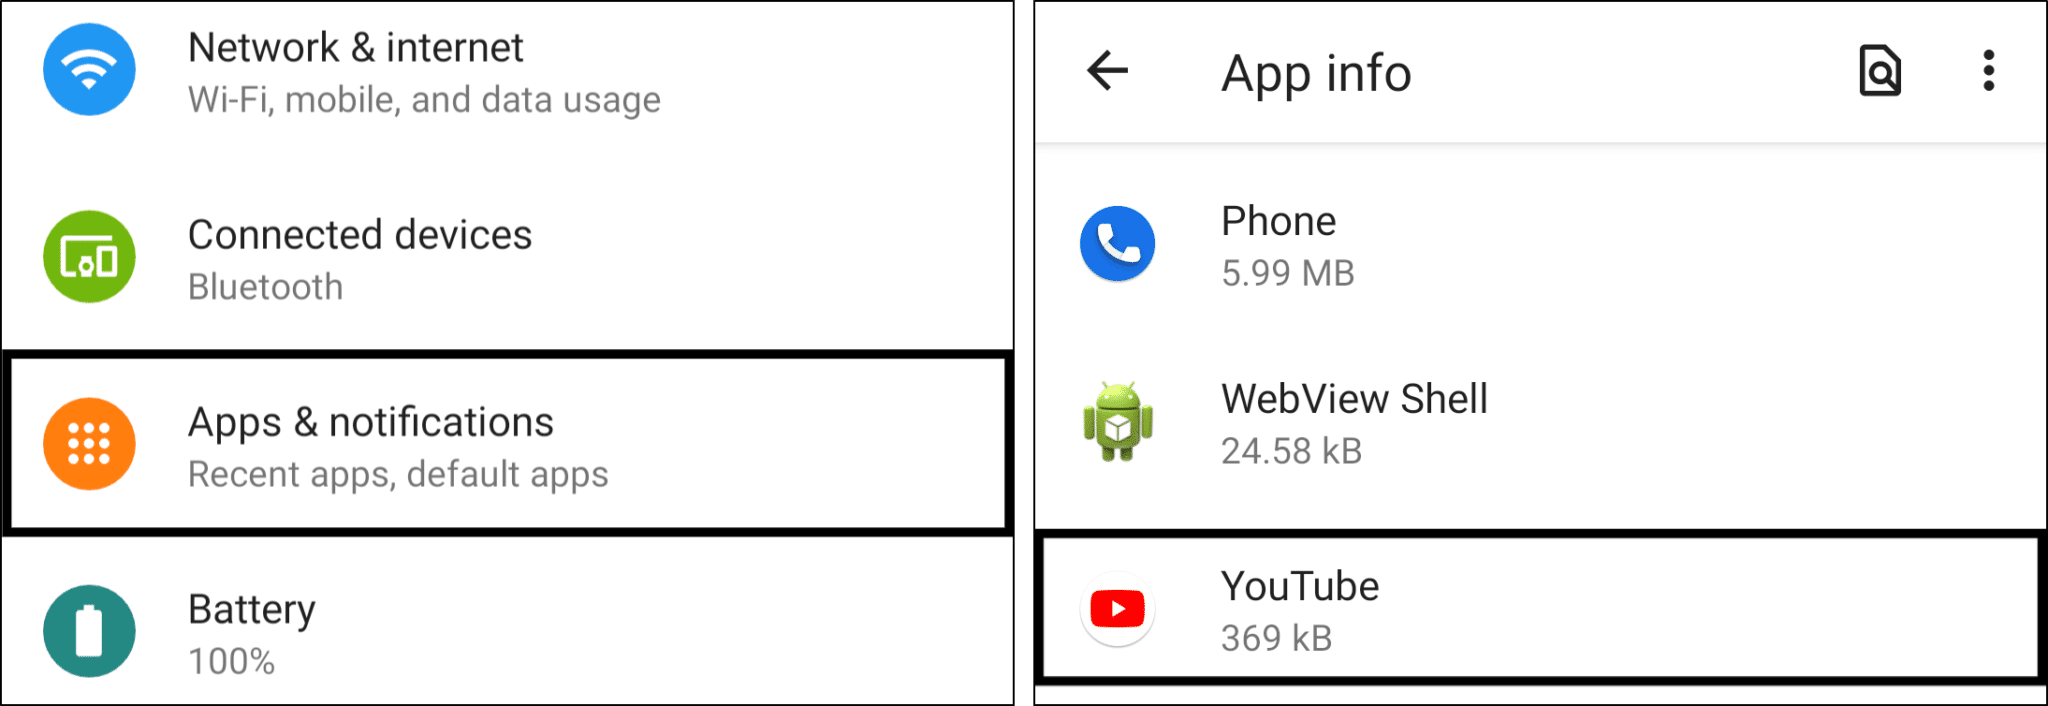 access YouTube app settings in system settings on Android to enable storage permissions to fix YouTube offline downloads not working or playing